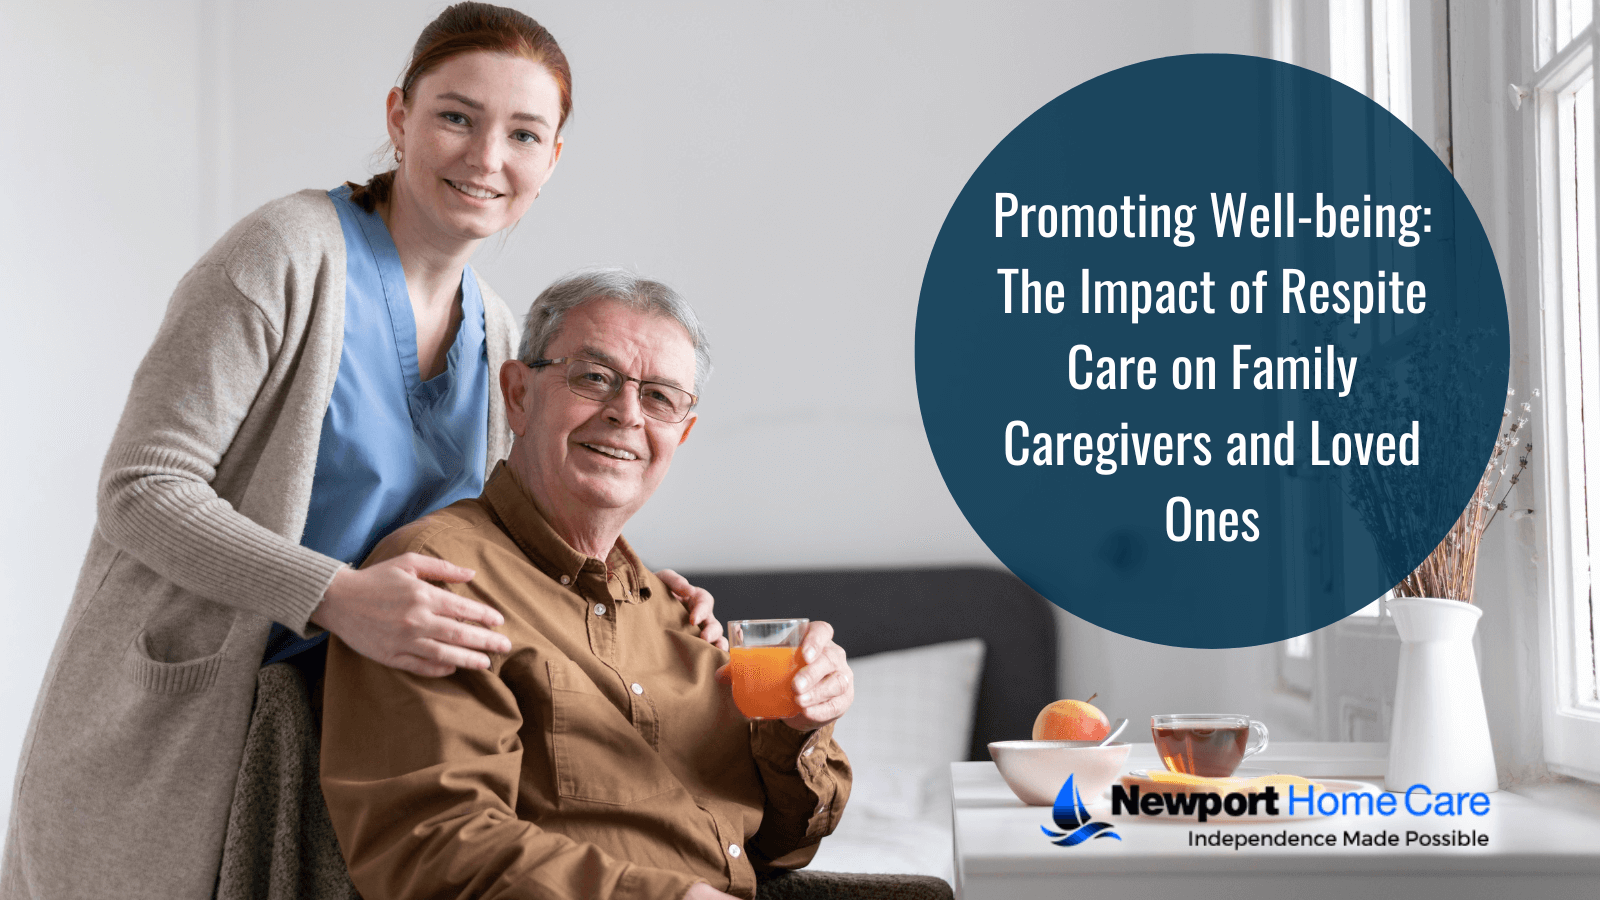 The Impact of Respite Care on Family Caregivers and Loved Ones